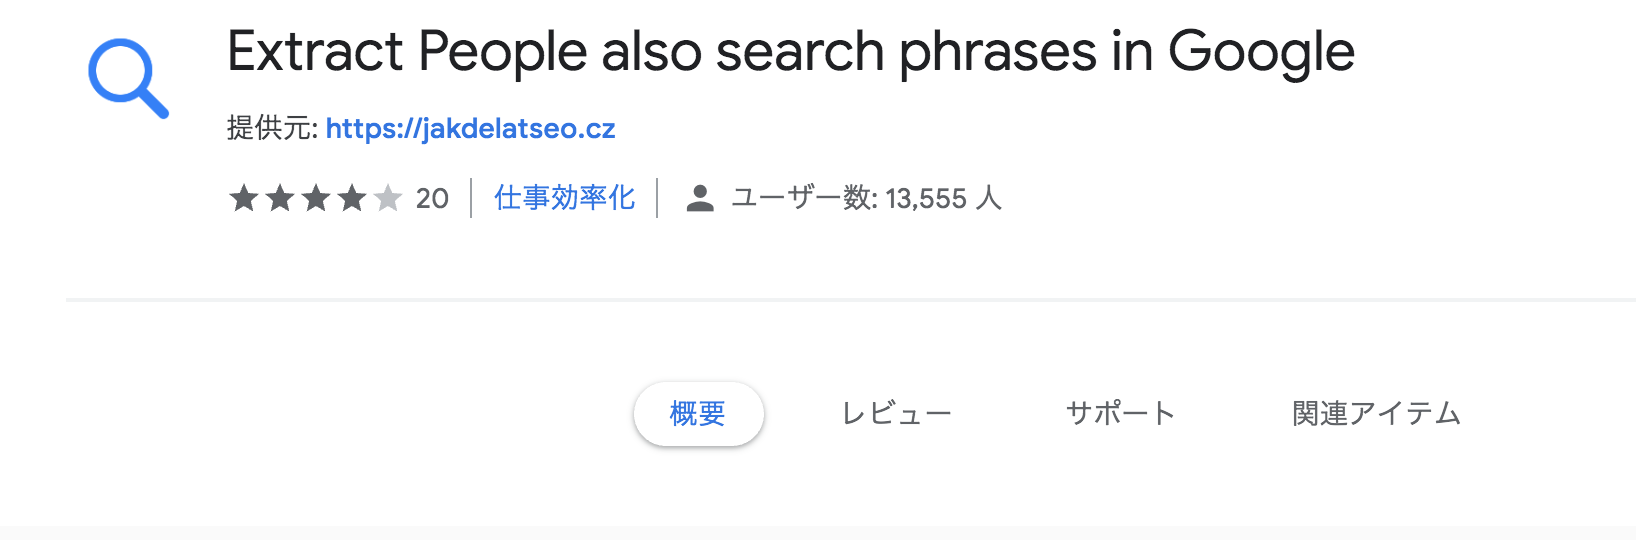 SEO対策　GoogleChrome　拡張機能　Extract People also search phrases in Google